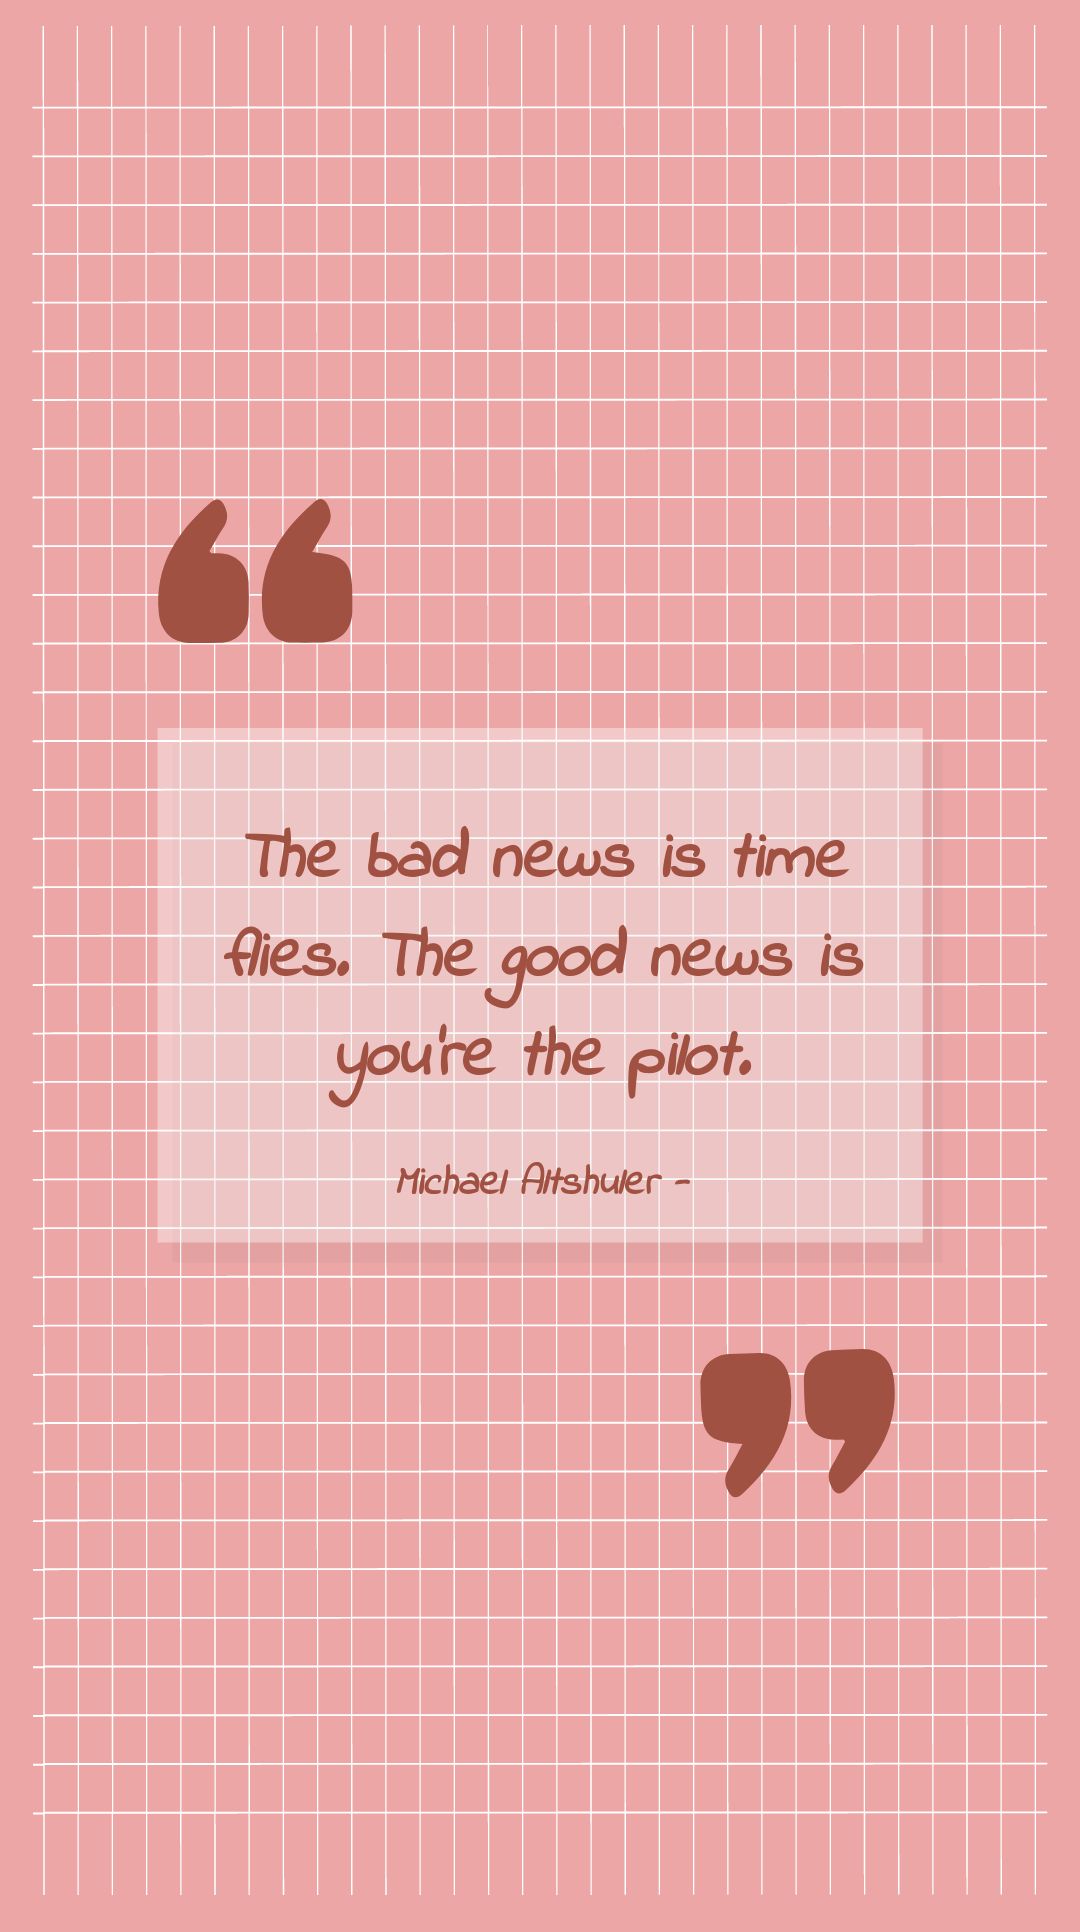 Michael Altshuler - The bad news is time flies. The good news is you’re the pilot.